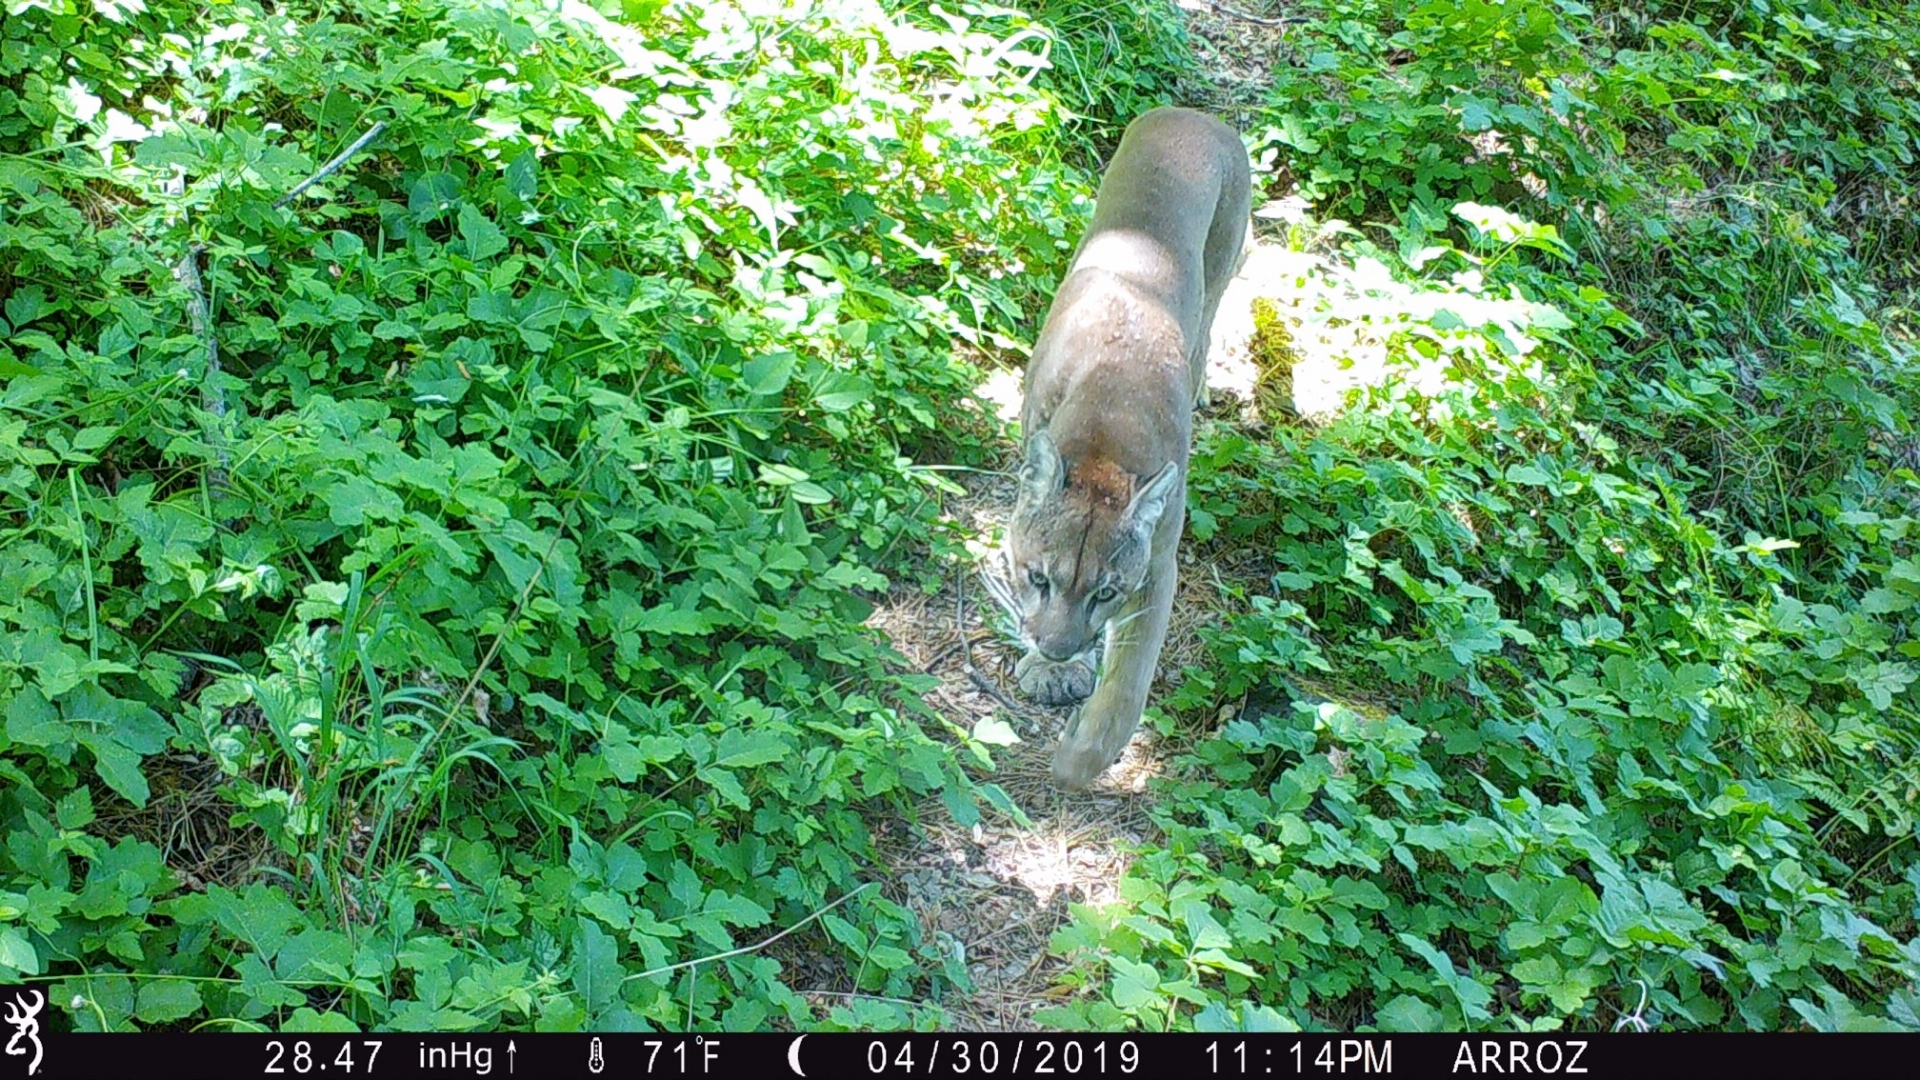 A mountain lion walks on a narrow path between clusters of poison oak and other plants.